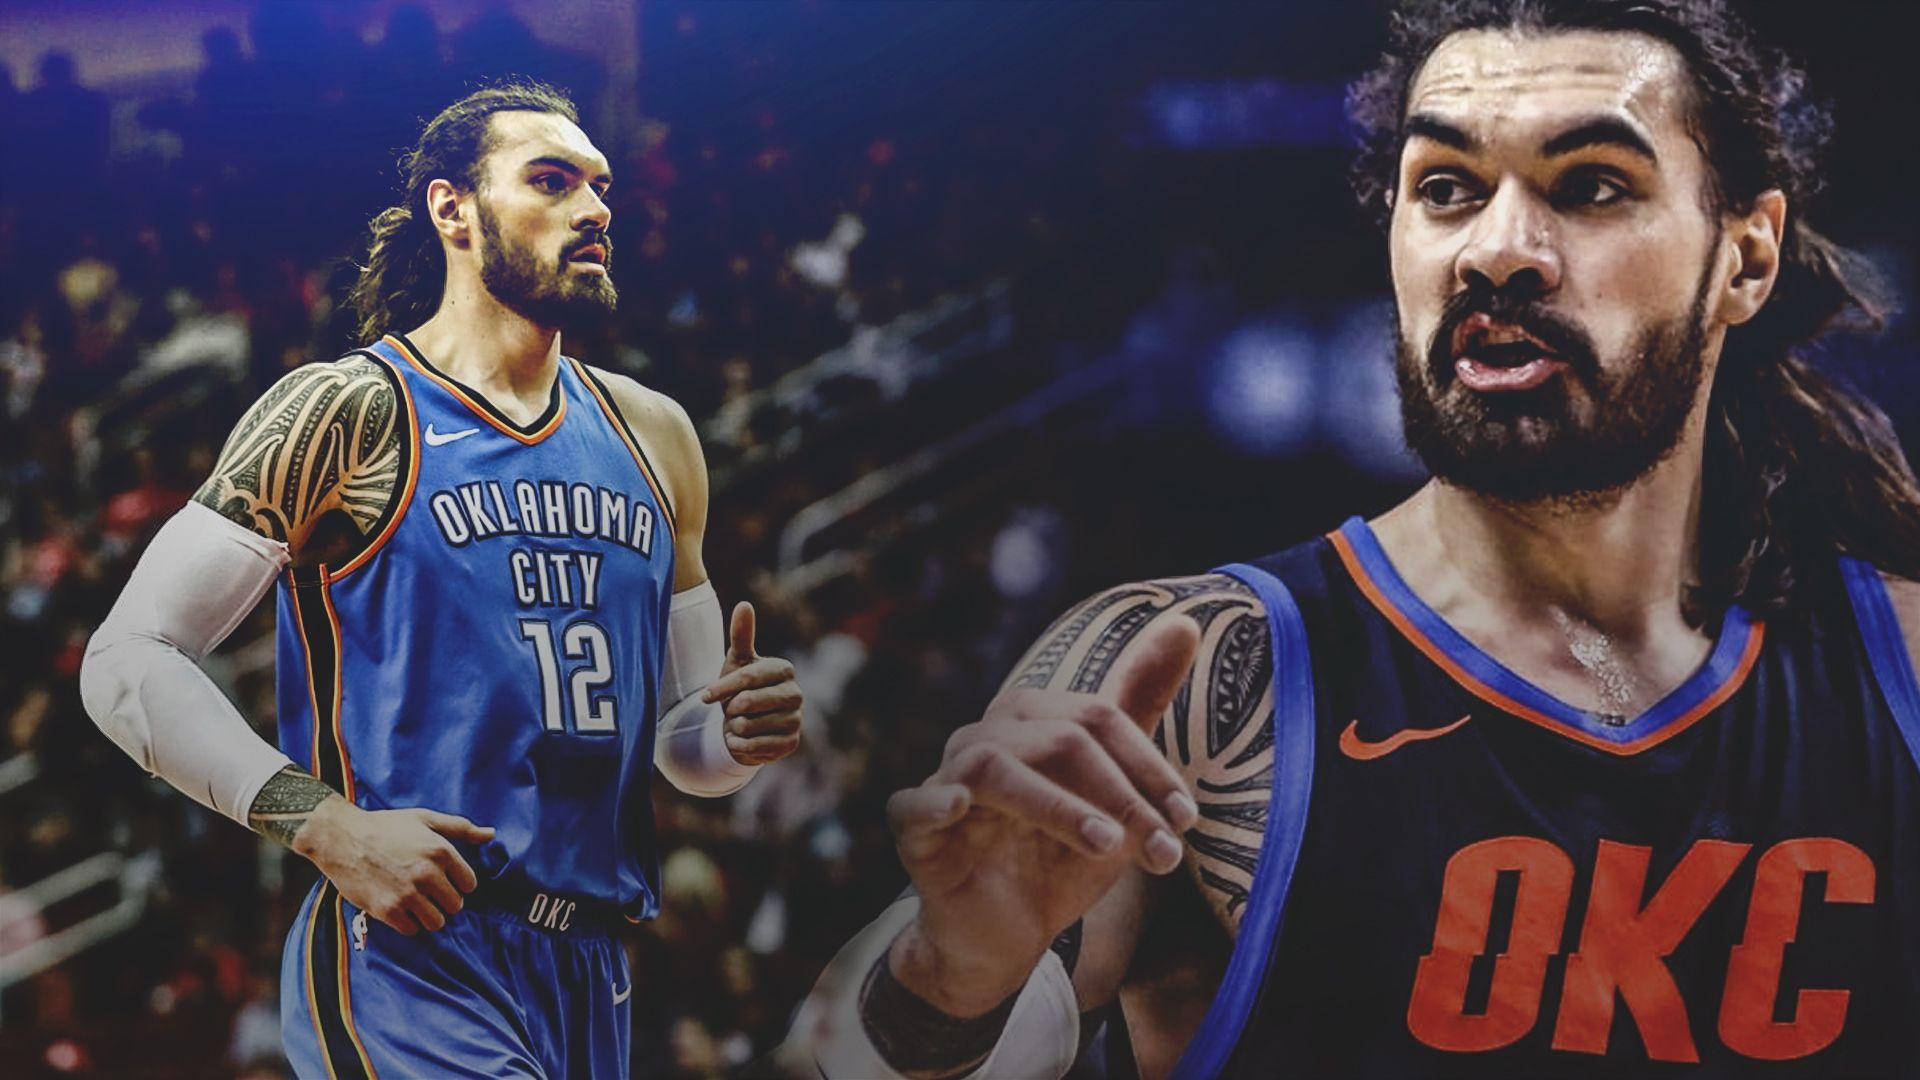 Caption: Steven Adams: The Thundering Force Background